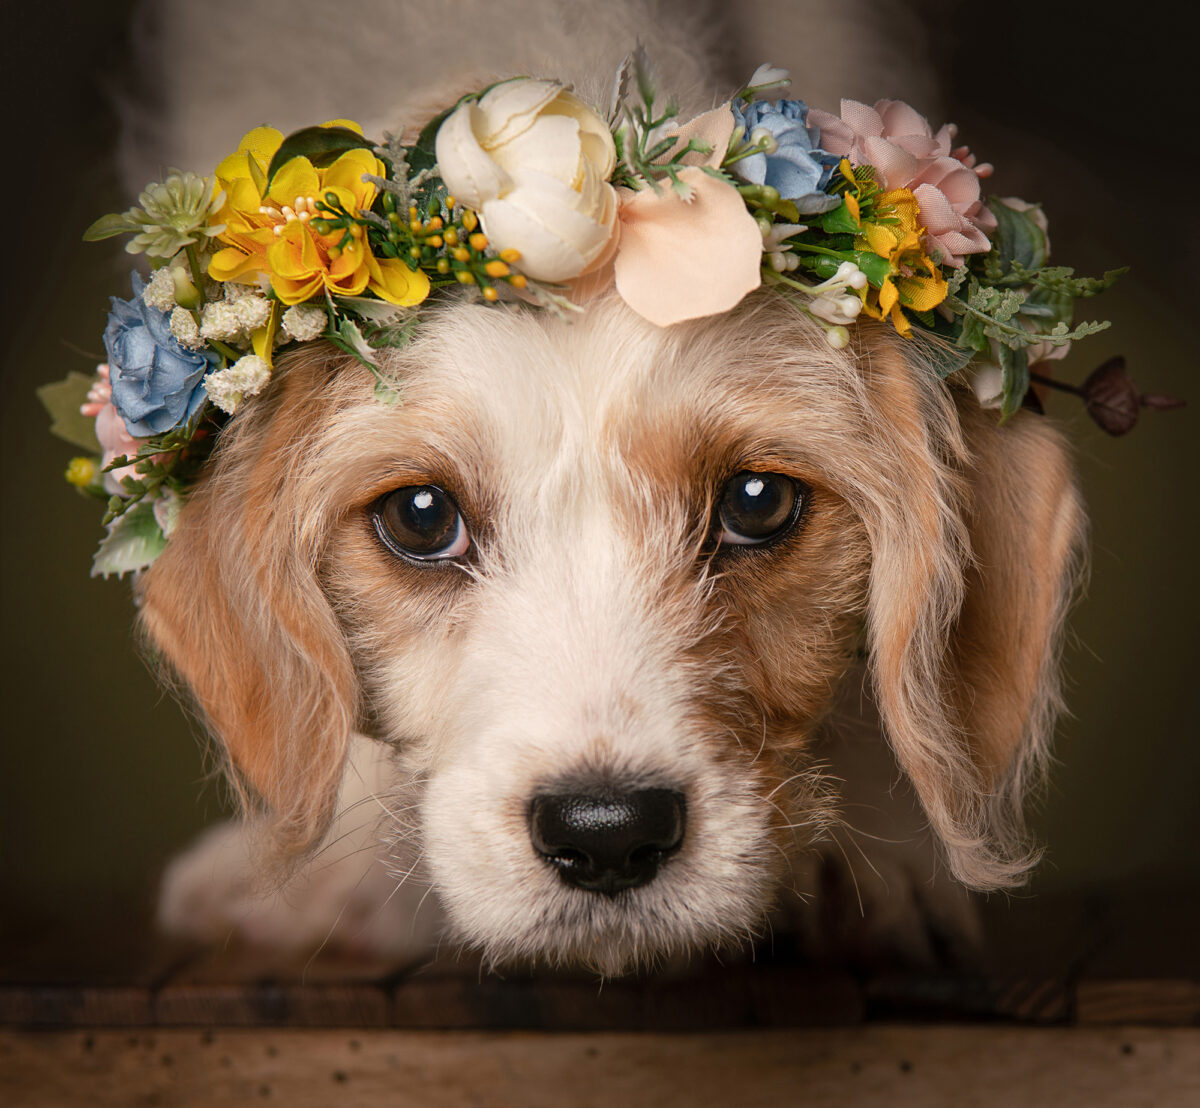 Professional pet photograph, taken by Northern Ireland's top pet photographer in Belfast of a small dog with a floral crown on